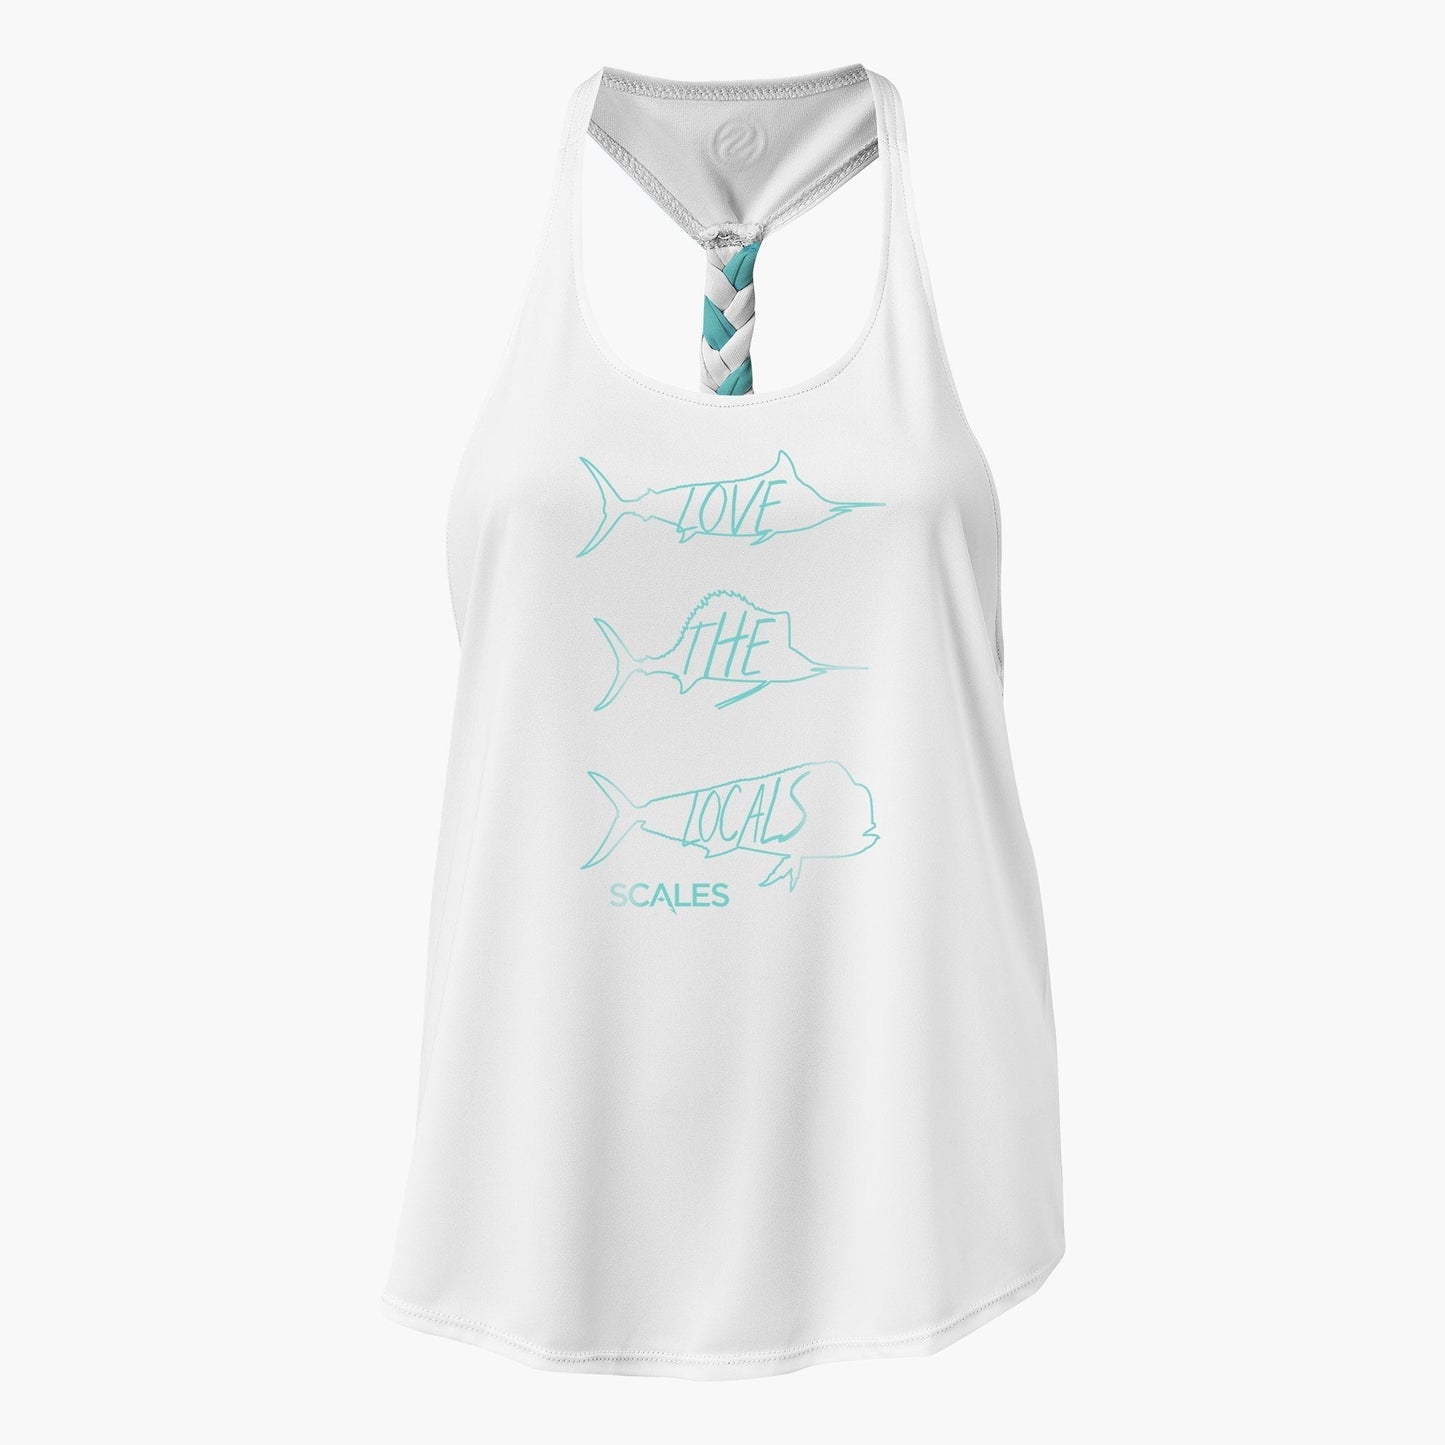  SCALES PRO Love The Locals Womens Performance Tank